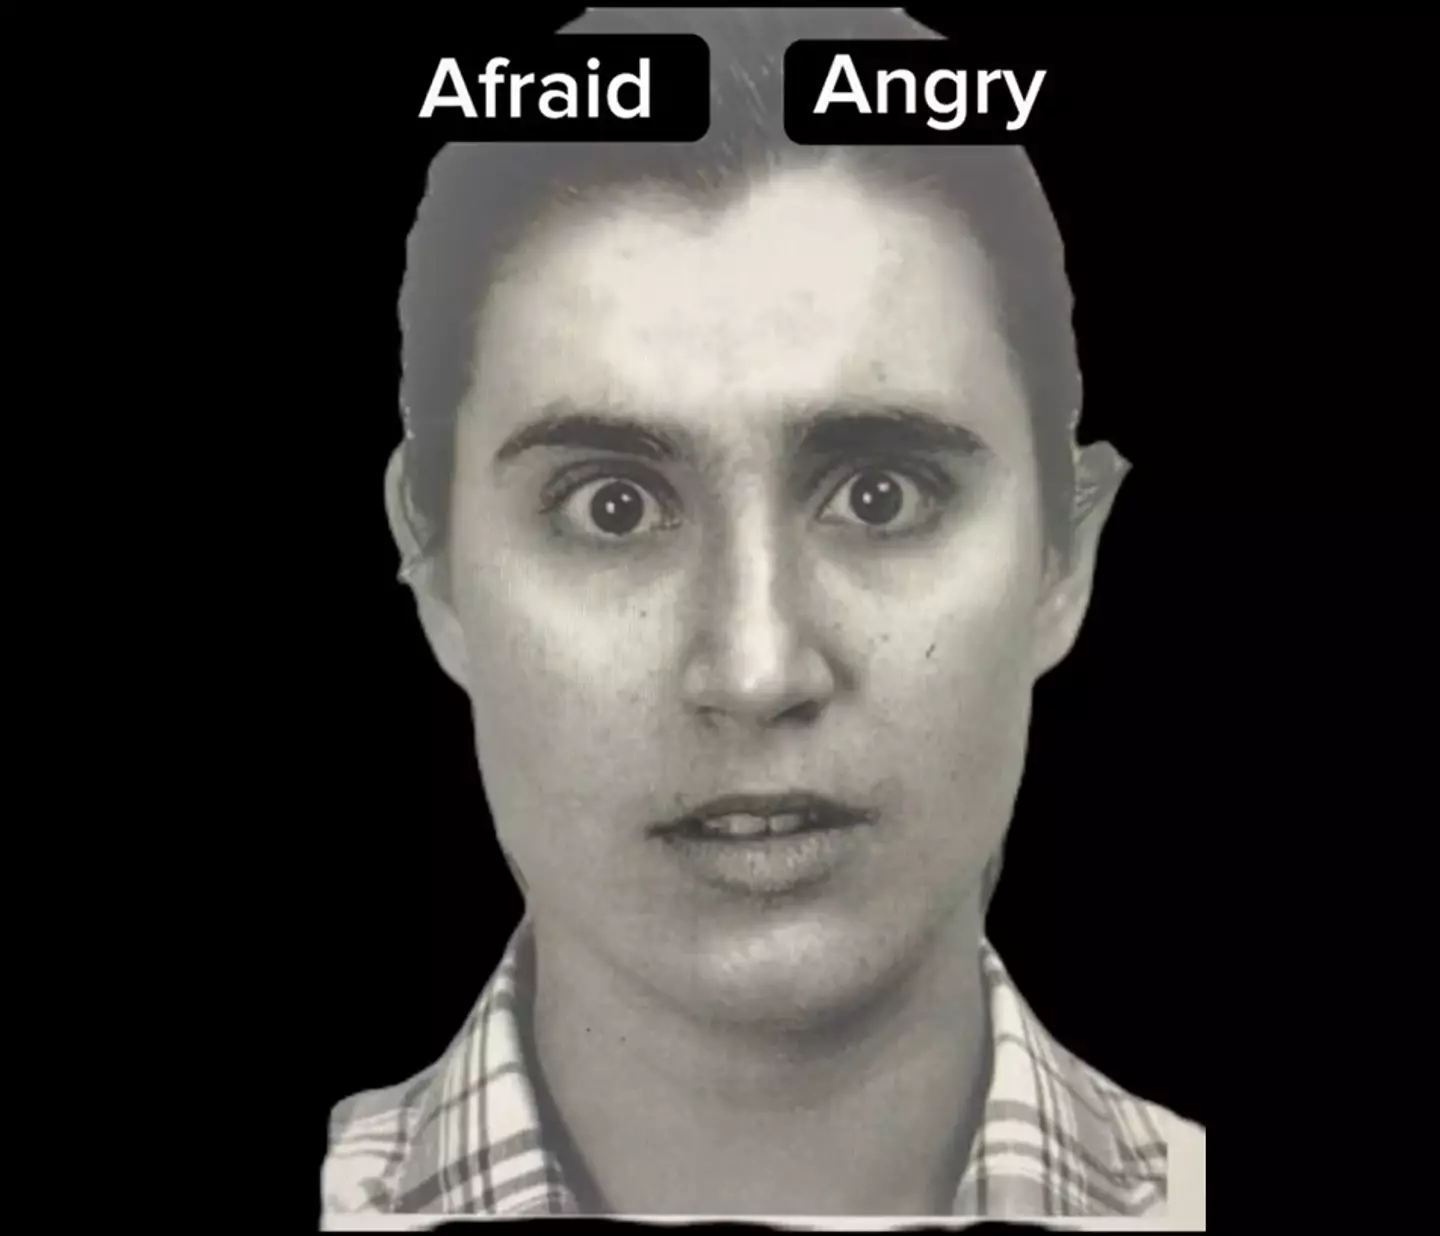 Is this the face of someone who is afraid or angry?